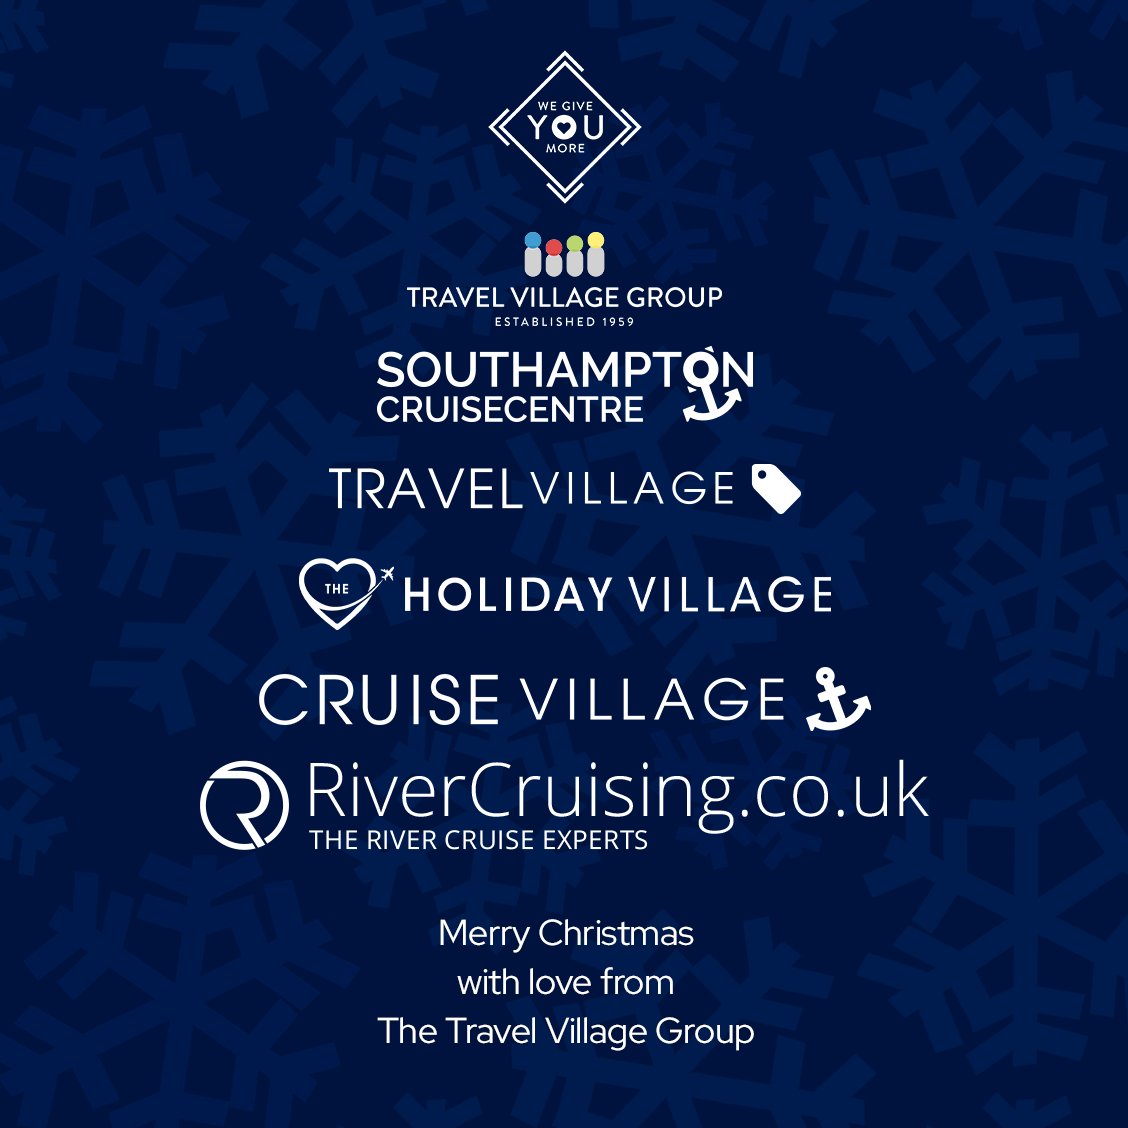 Merry Christmas to all our wonderful customers, with love from everyone at The Travel Village Group.